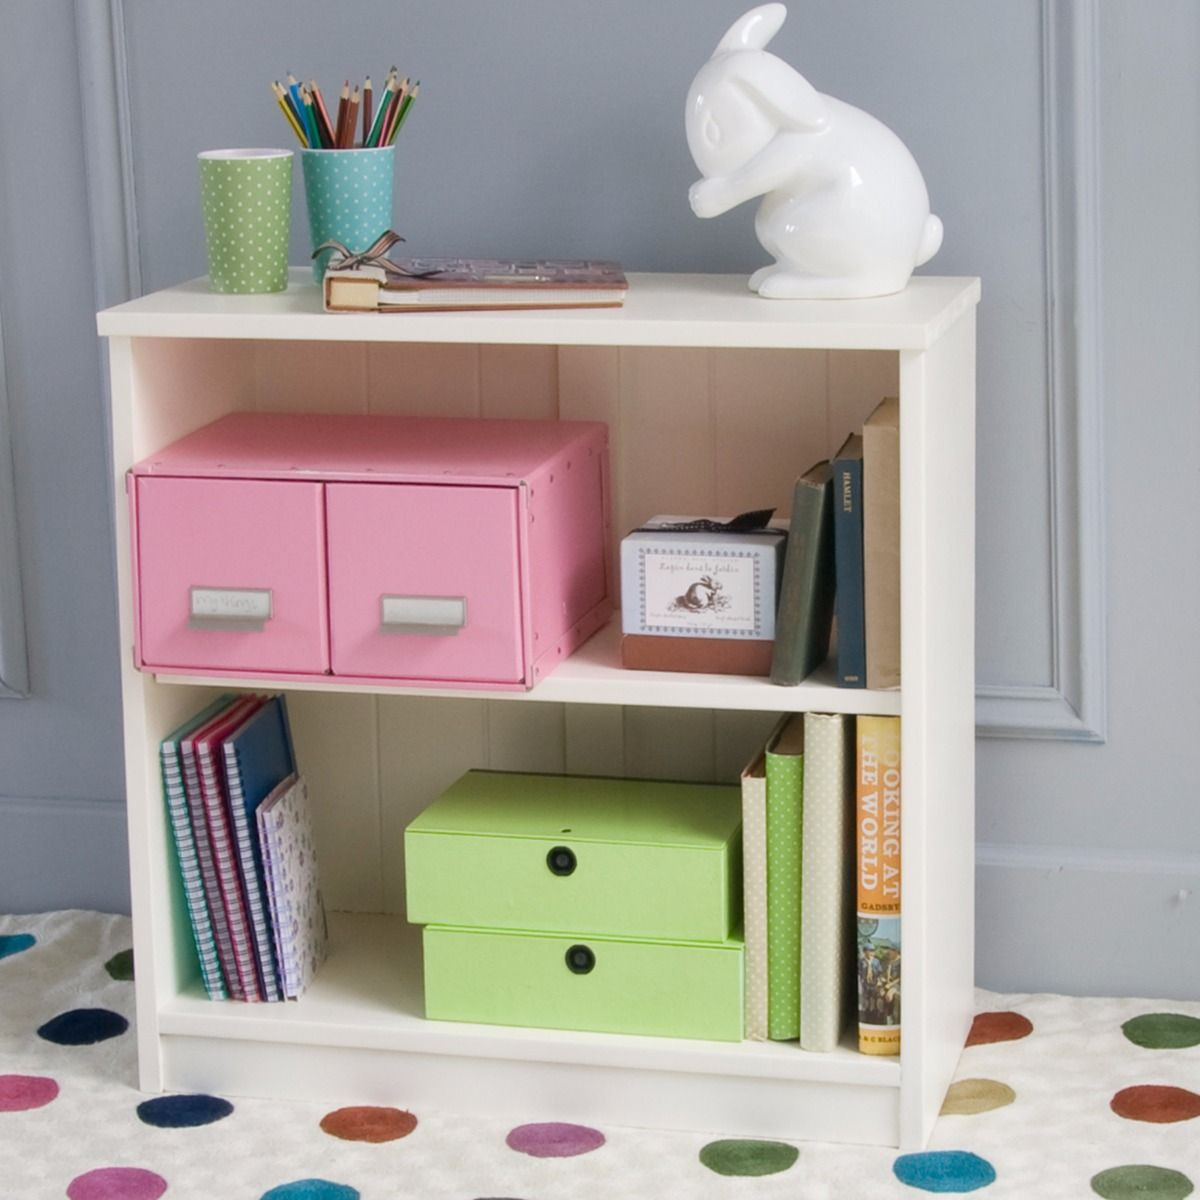 Childrens Bookcases And Storage
 Fargo Storage Bookcase Ivory White by Little Folks for